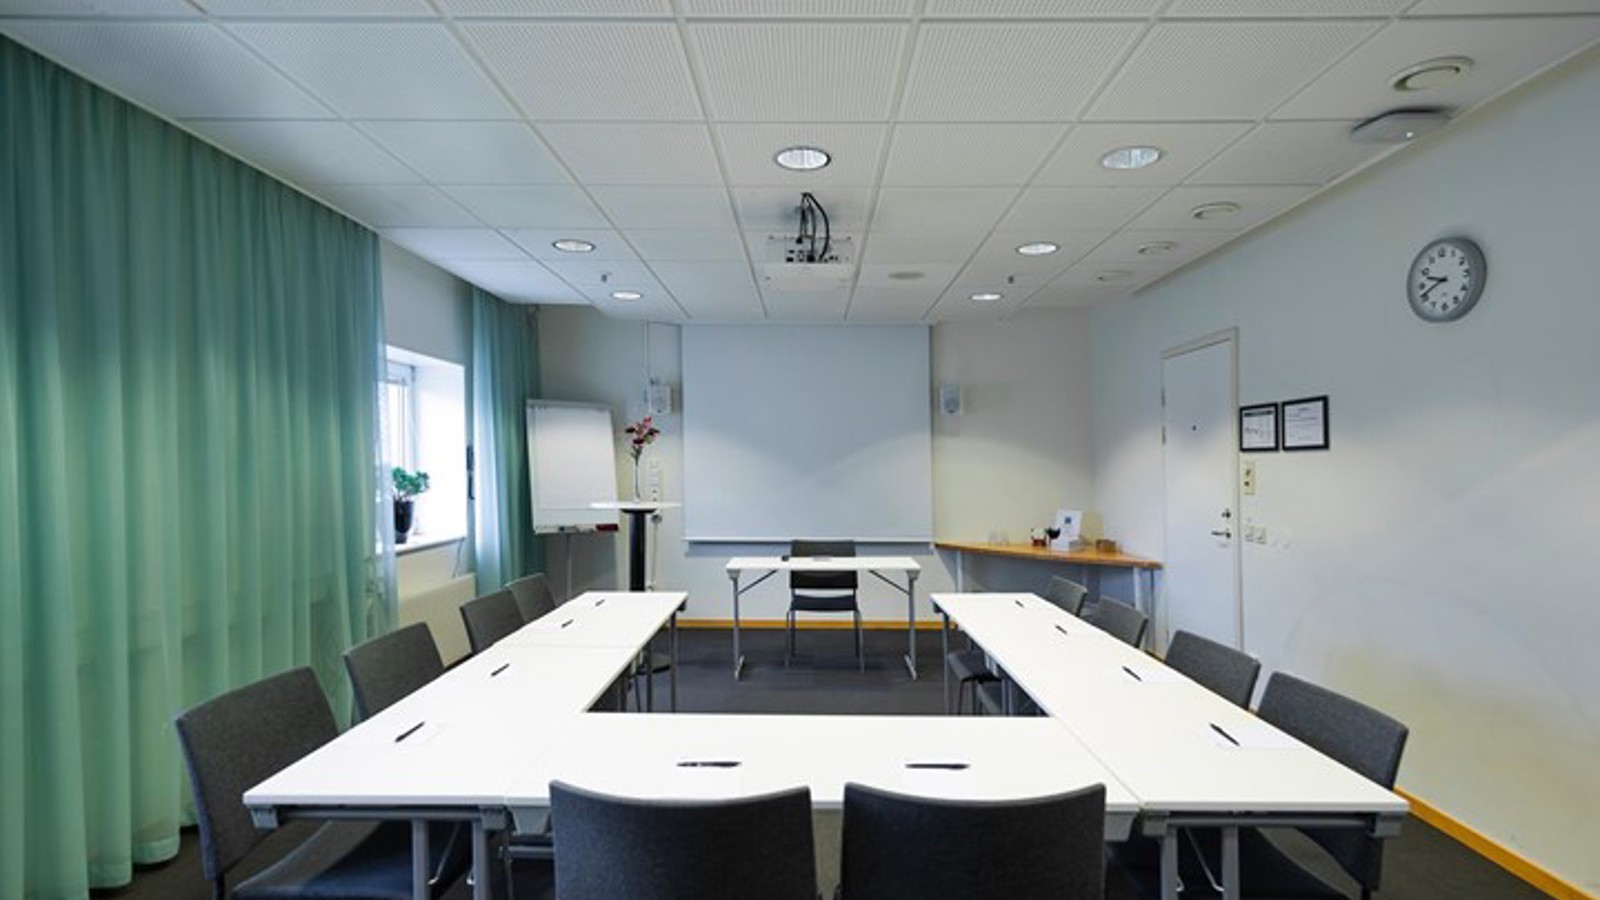 Conference room with U-shaped seating, green curtains, white table and gray chairs